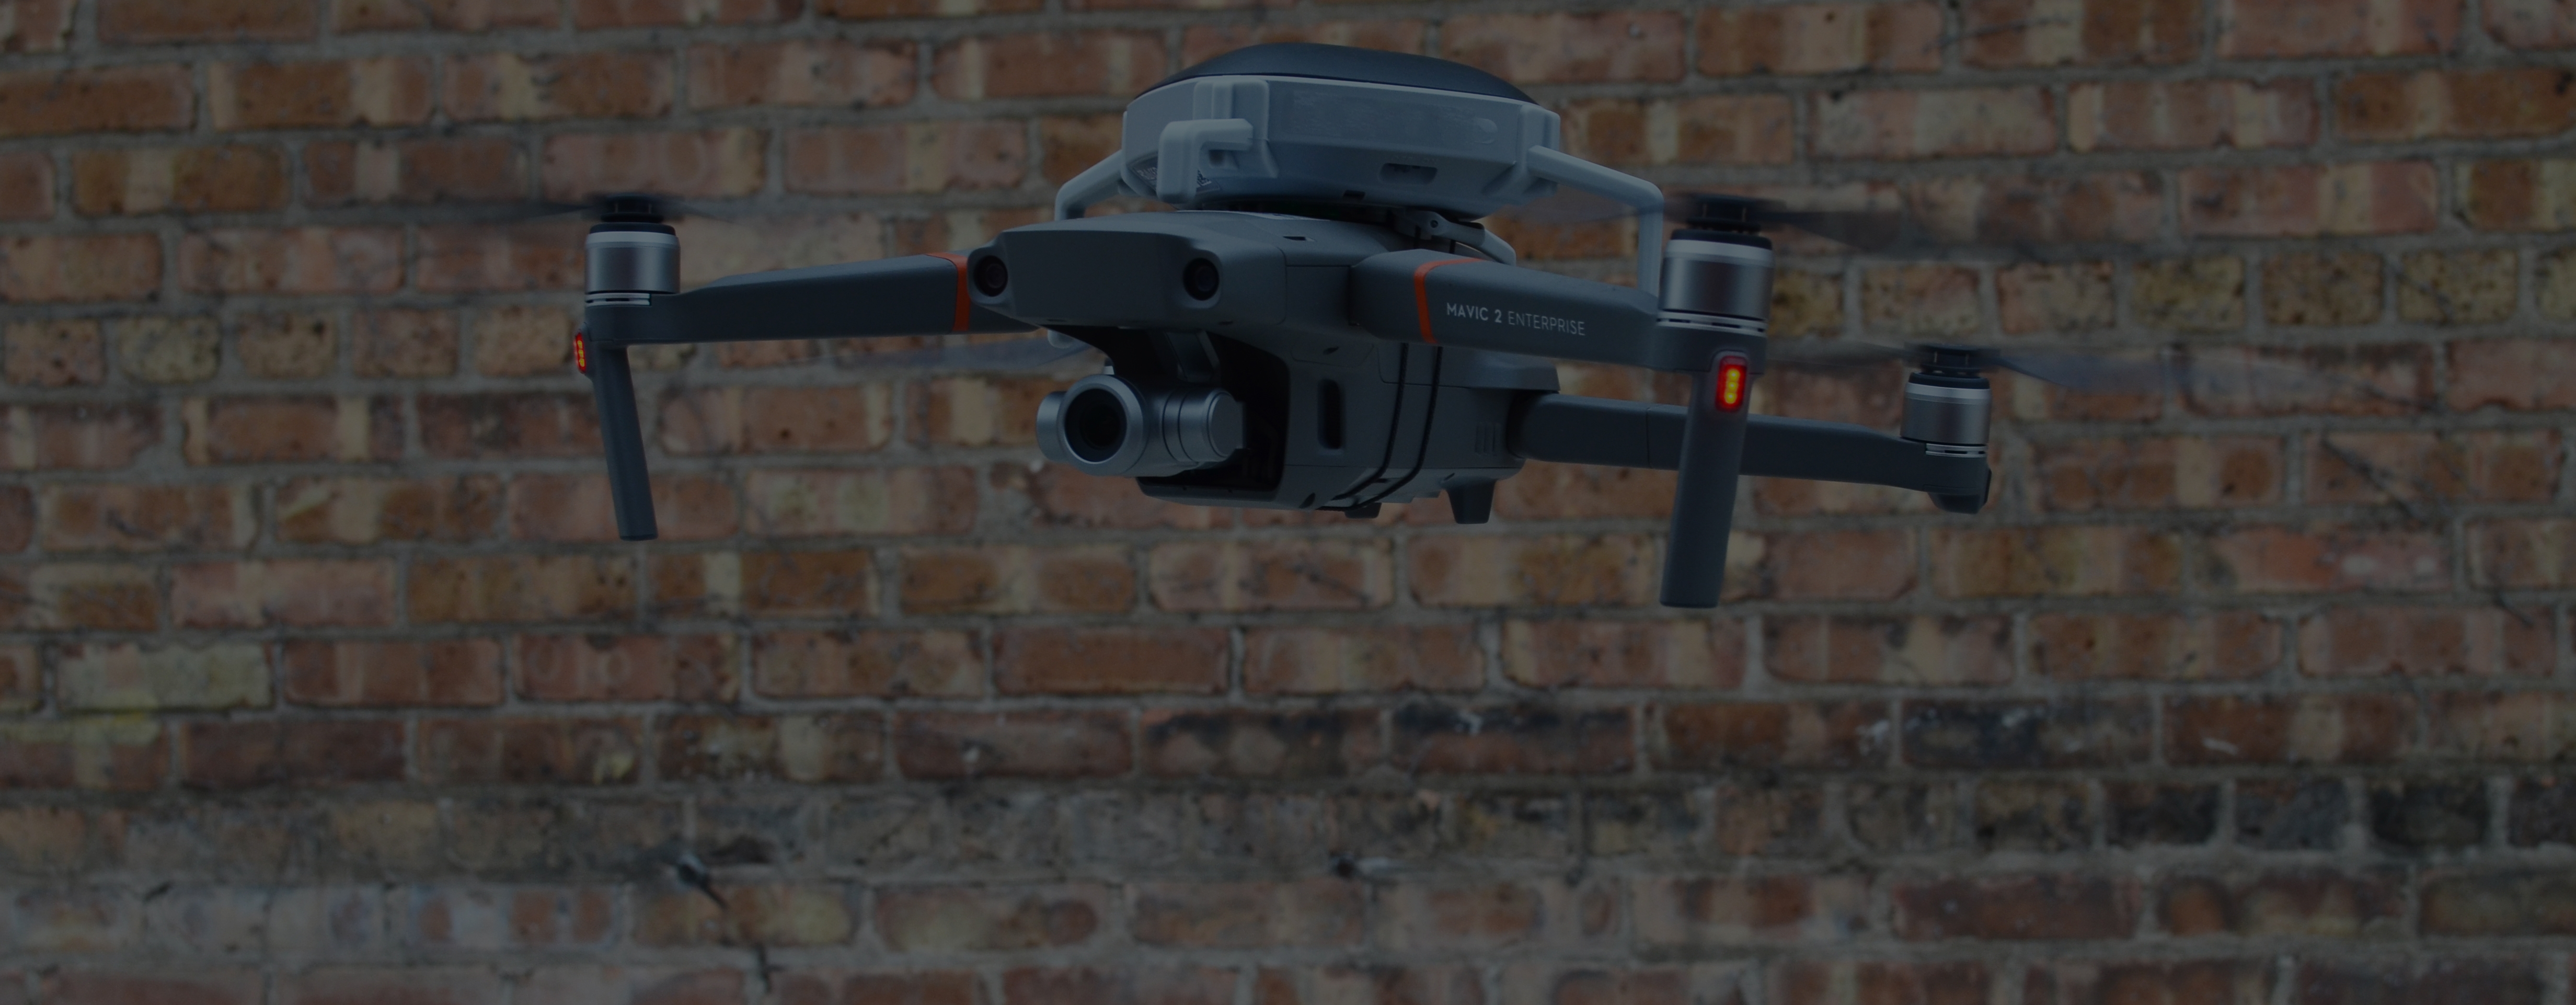 Helios Visions Obtains FAA Issued Waiver to Safely Operate Drones Over People